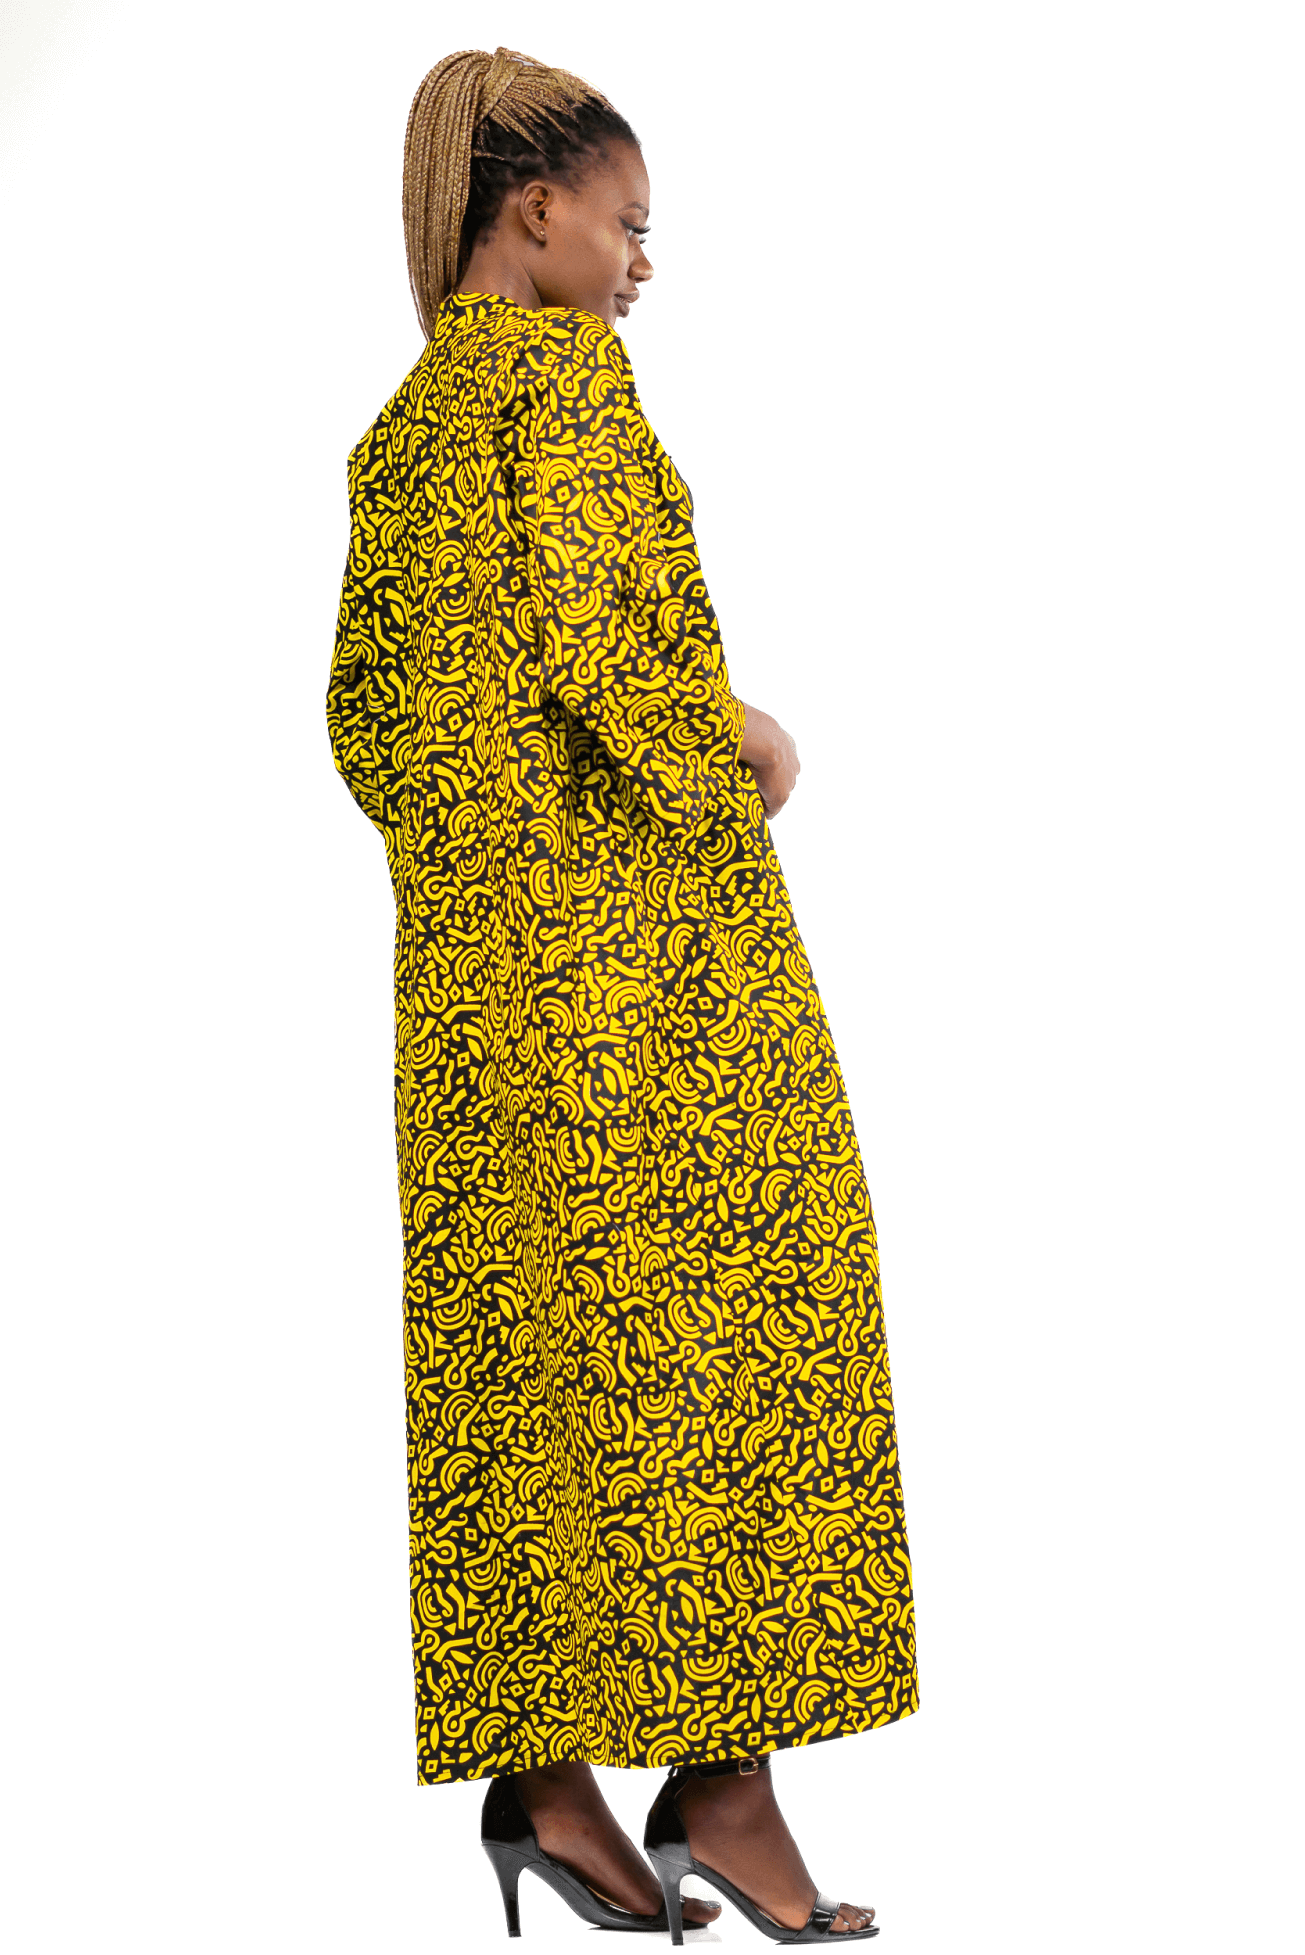 Shop Mimosa Printed Kimono by Cyami Custom Fit on Arrai. Discover stylish, affordable clothing, jewelry, handbags and unique handmade pieces from top Kenyan & African fashion brands prioritising sustainability and quality craftsmanship.